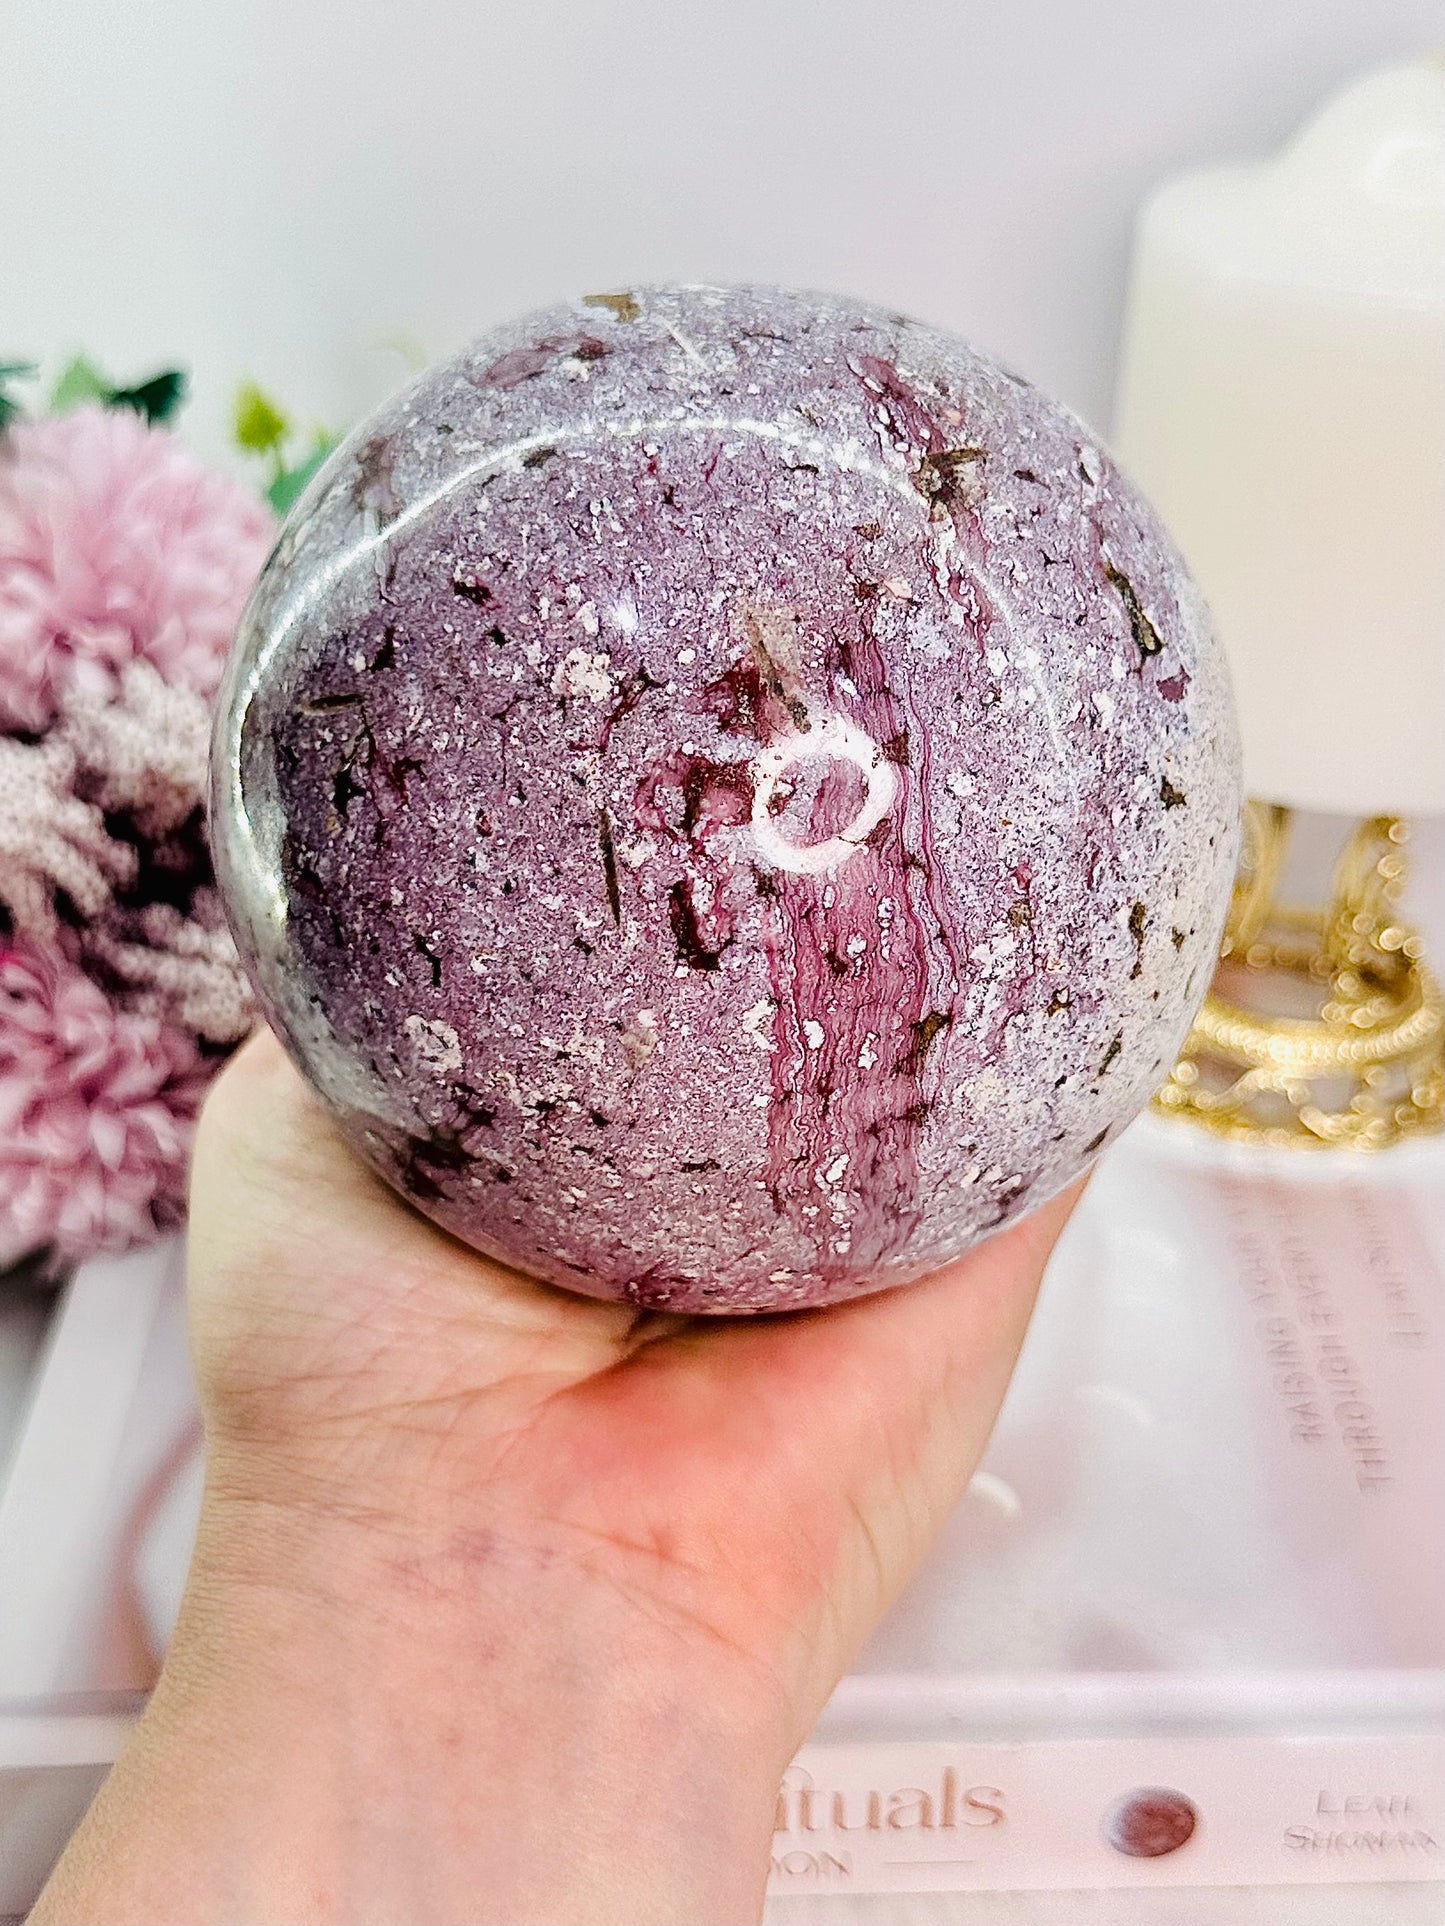 WOW!!!!! Absolutely Huge Classy & Fabulous 1.3KG Ocean Jasper Amazing Sphere on Silver Stand - Truly Incredible Piece